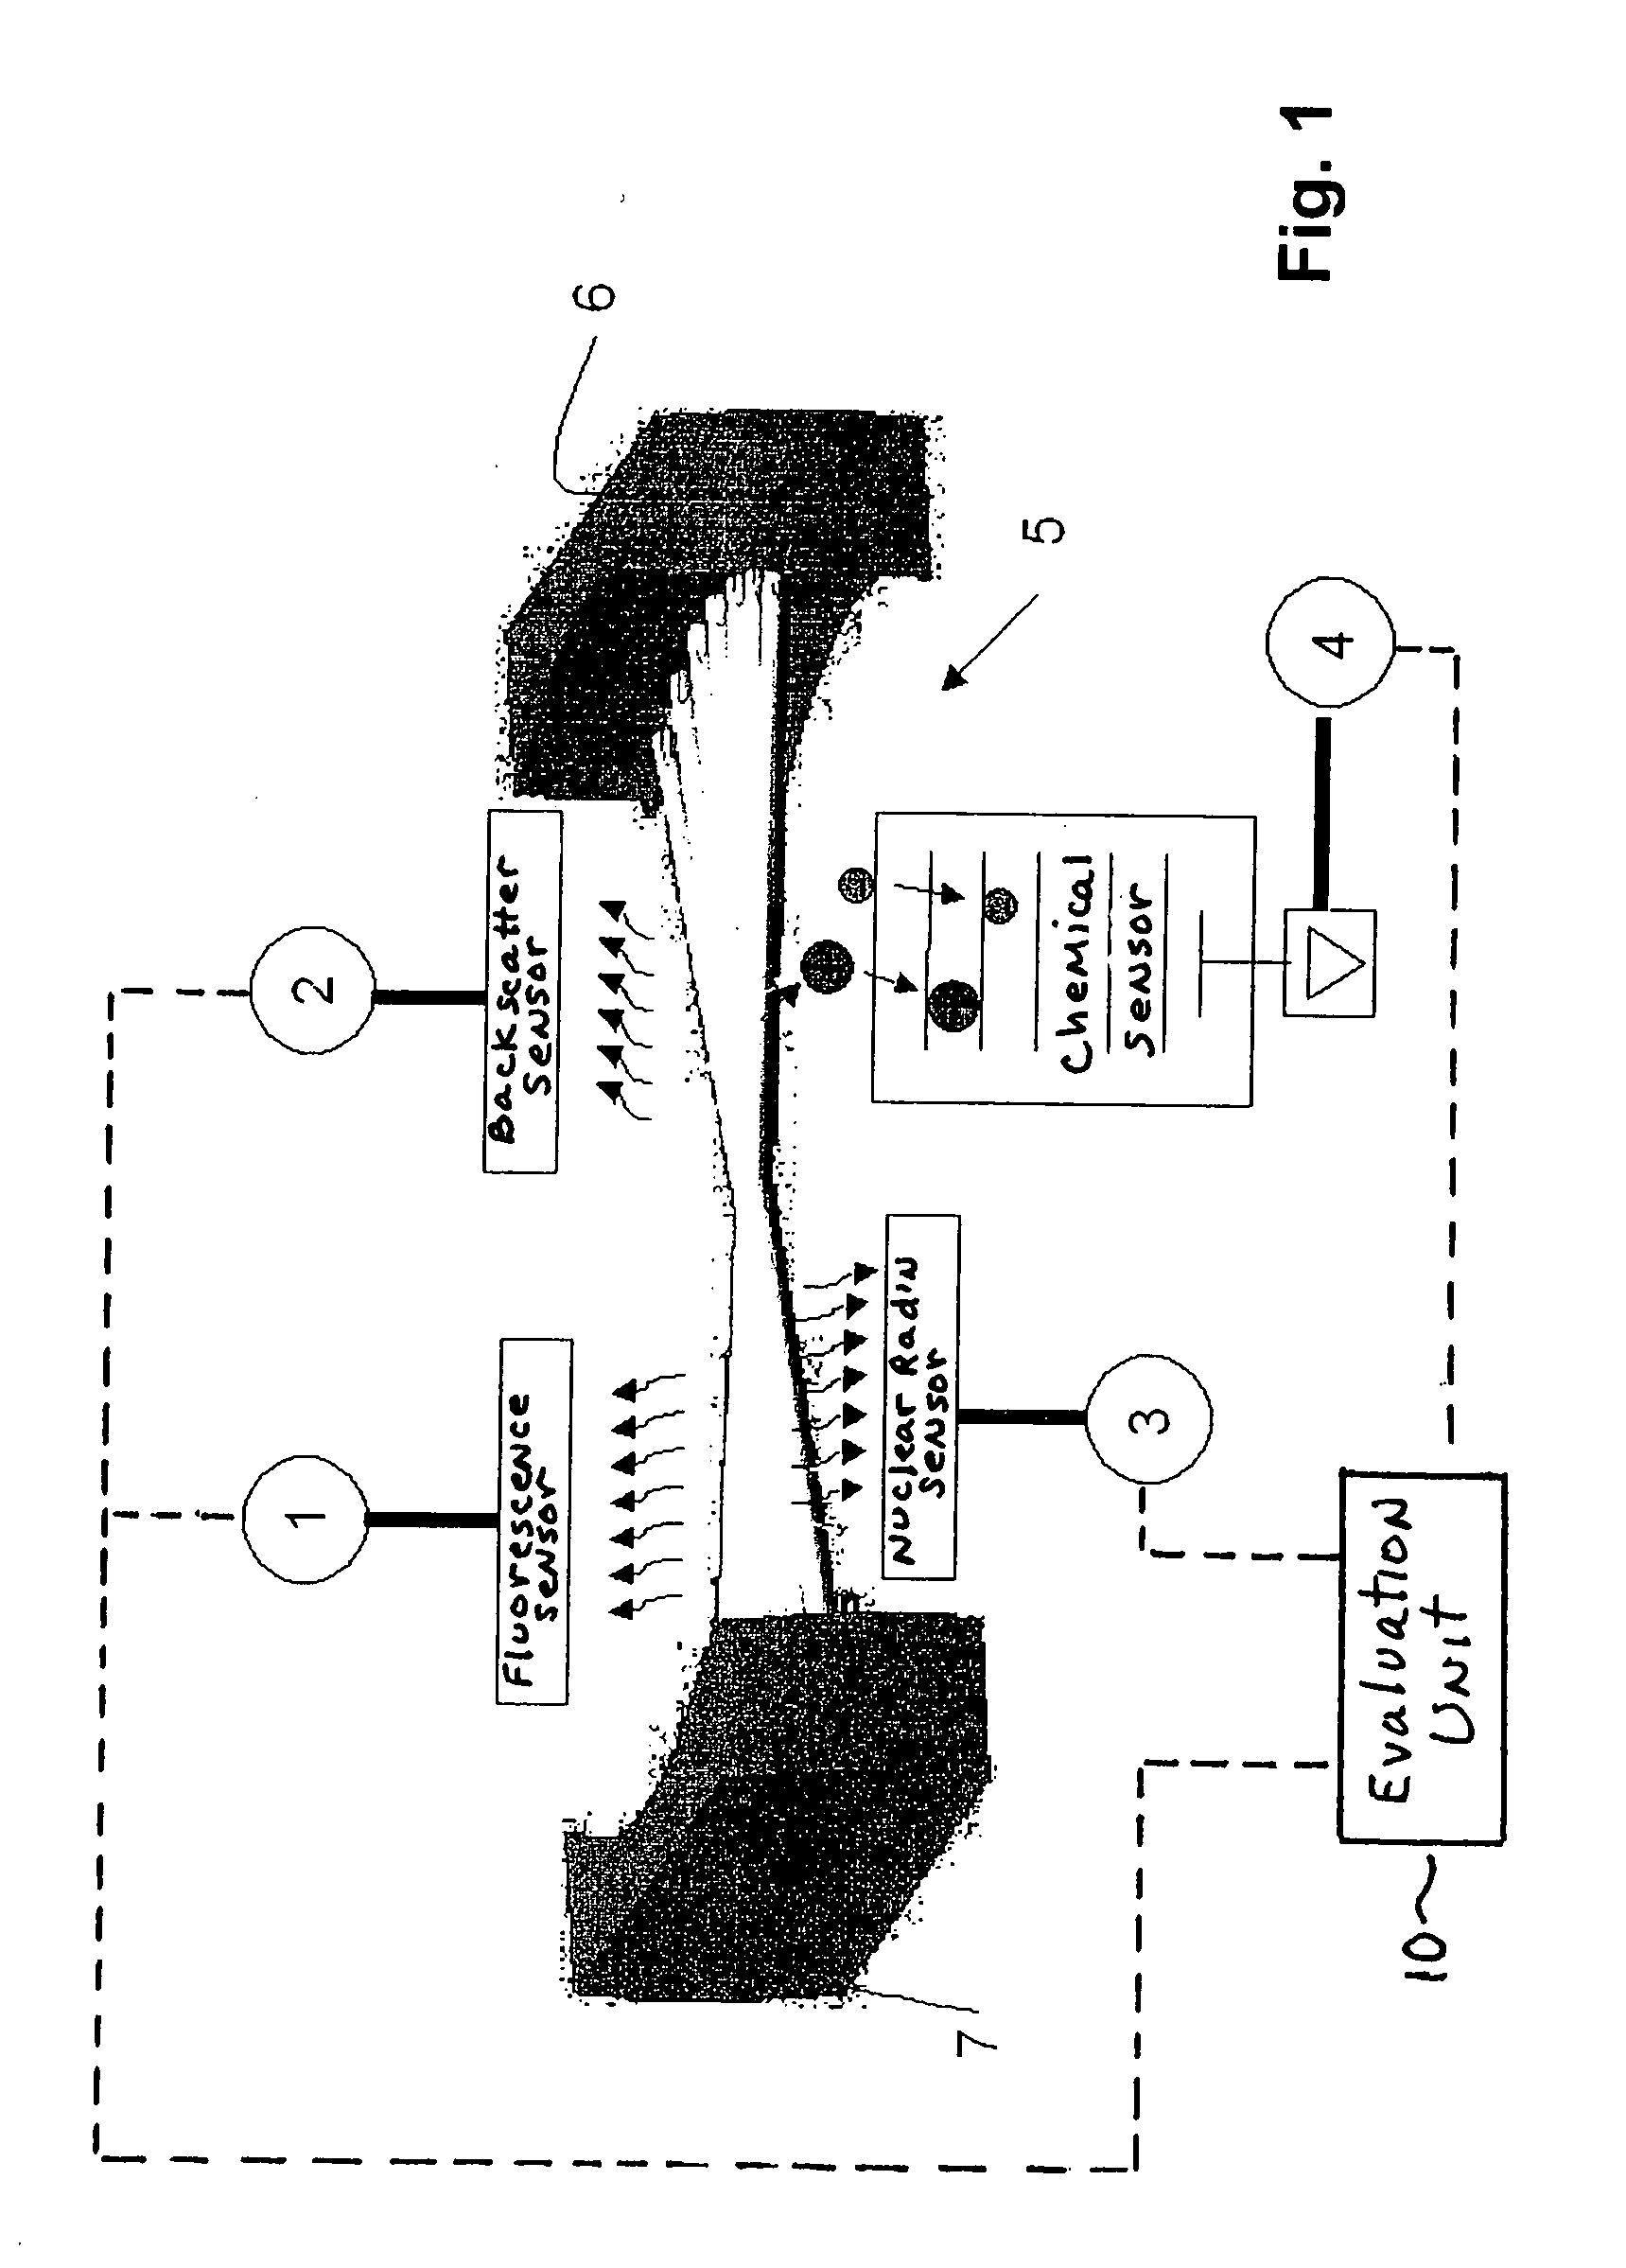 Method and apparatus for real-time analysis of chemical, biological and explosive substances in the air